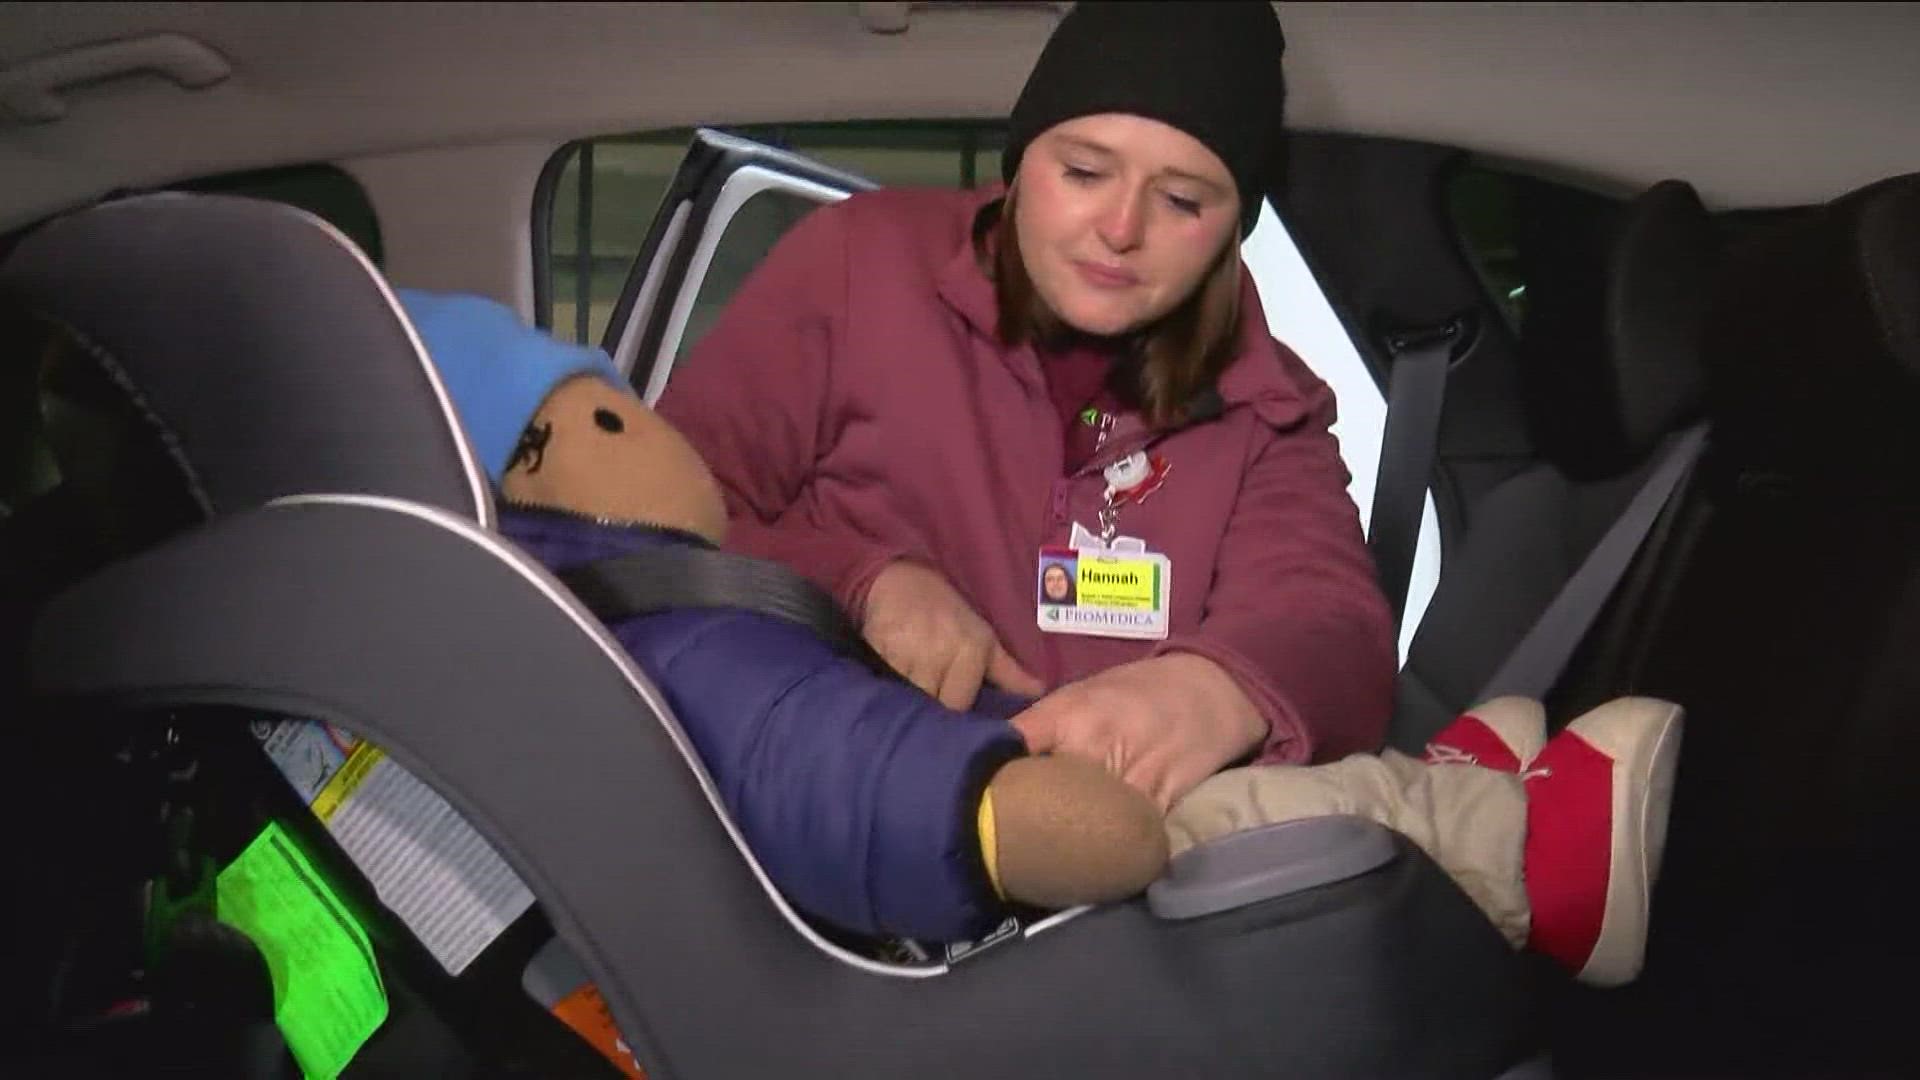 Wearing a heavy winter coat can make your baby unsafe in a car seat. We learn how to keep babies safe and warm when traveling in the car.